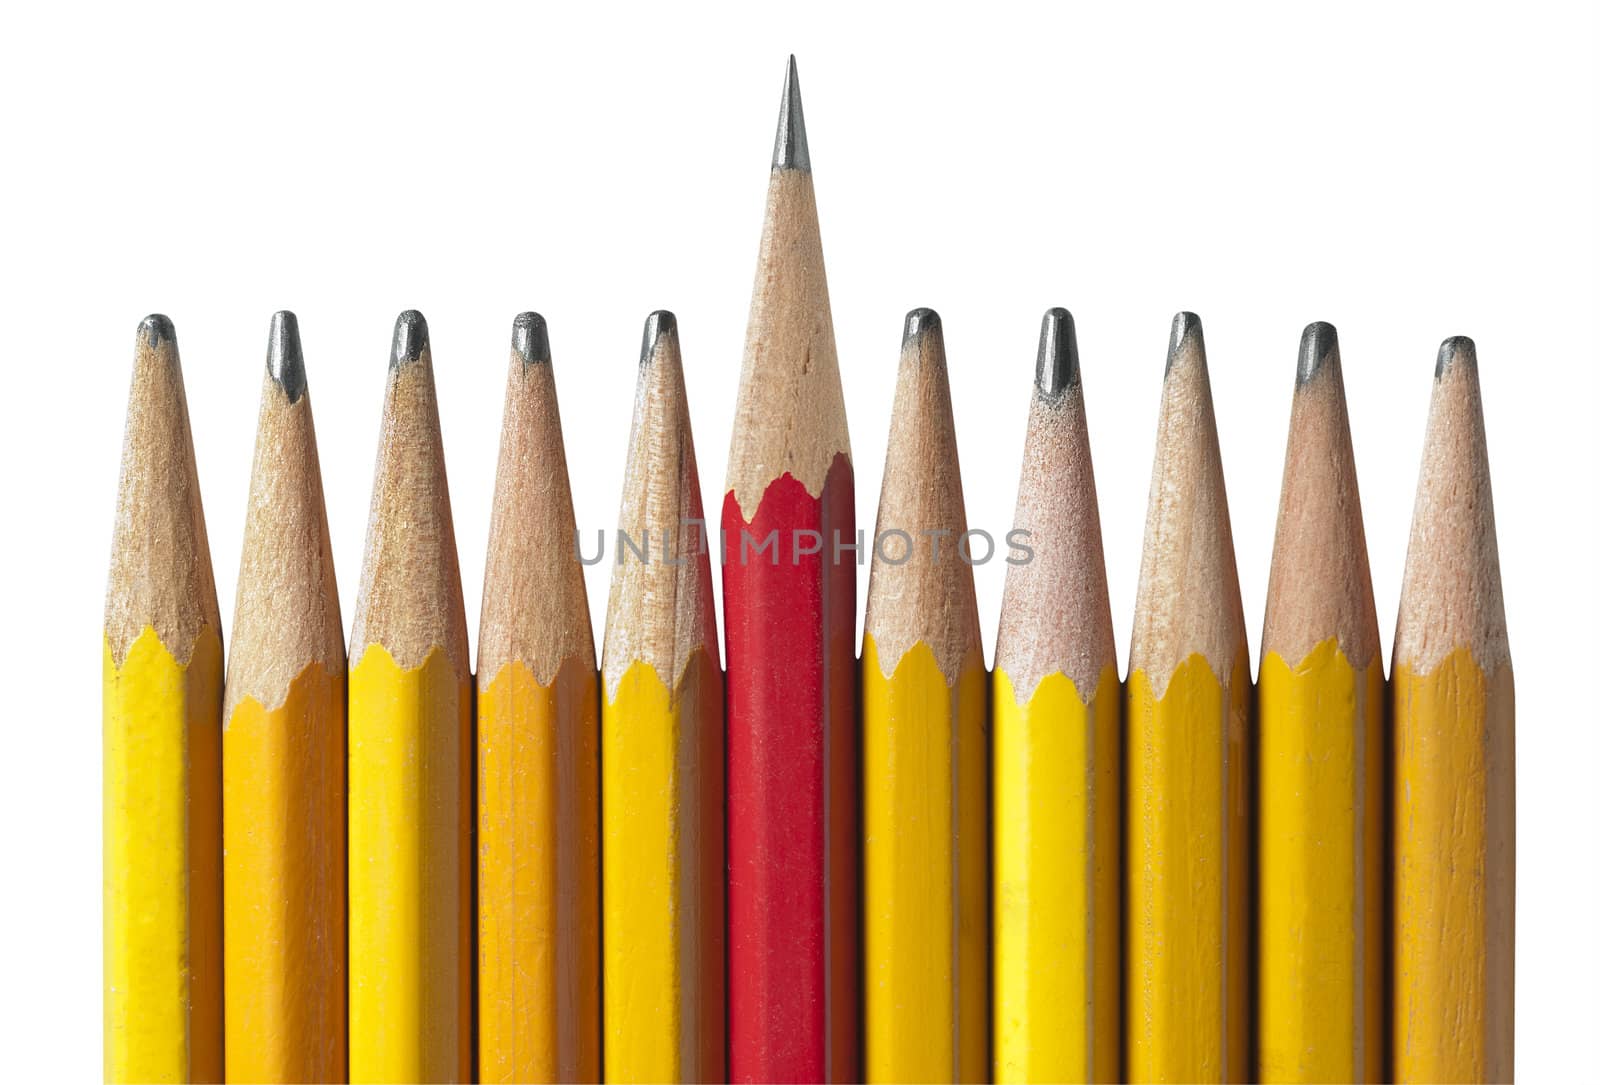 Sharpest Pencil in the Bunch: metaphor for leadership, intelligence, & individuality to teamwork and unity.